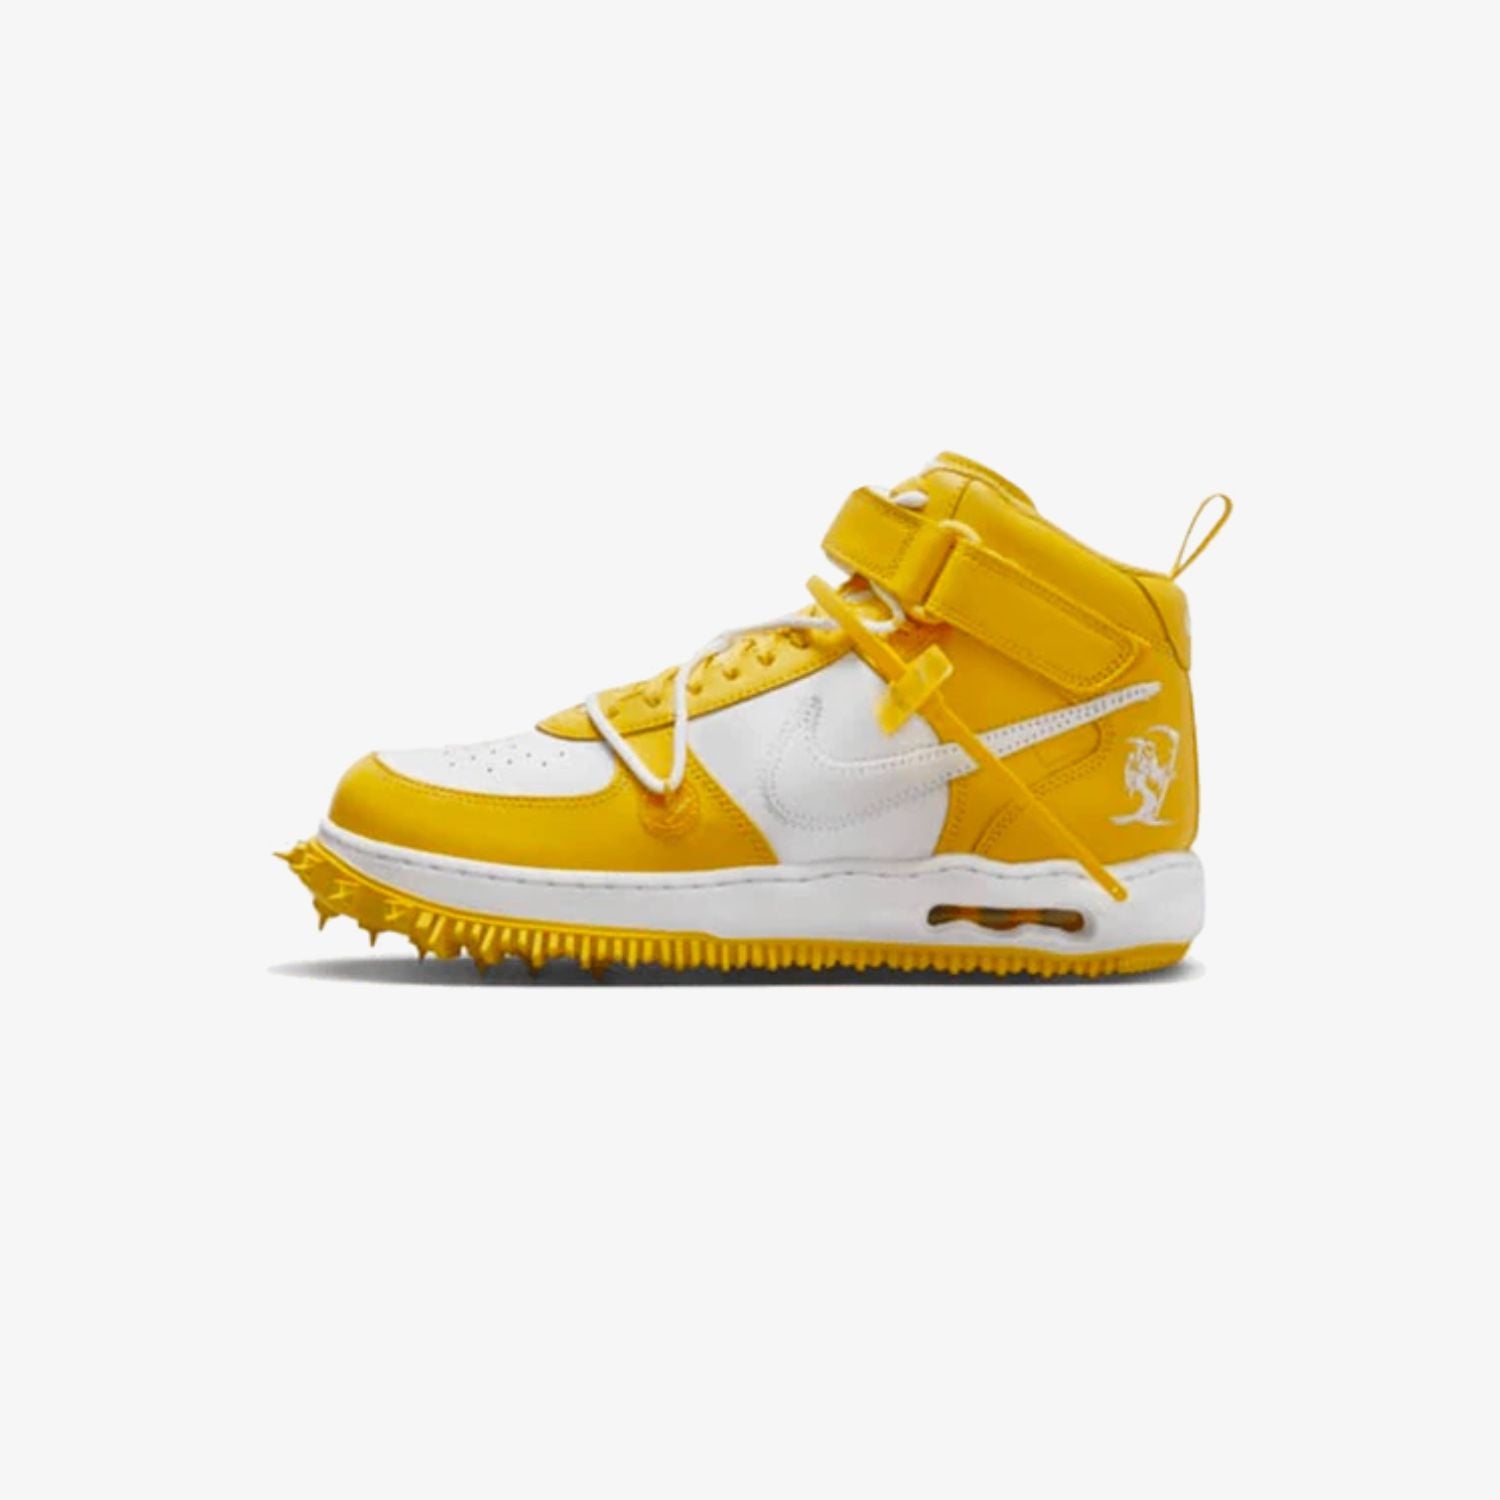 off-white-nike-air-force-1-varsity-maize-DR0500-101-unfazed-1_1